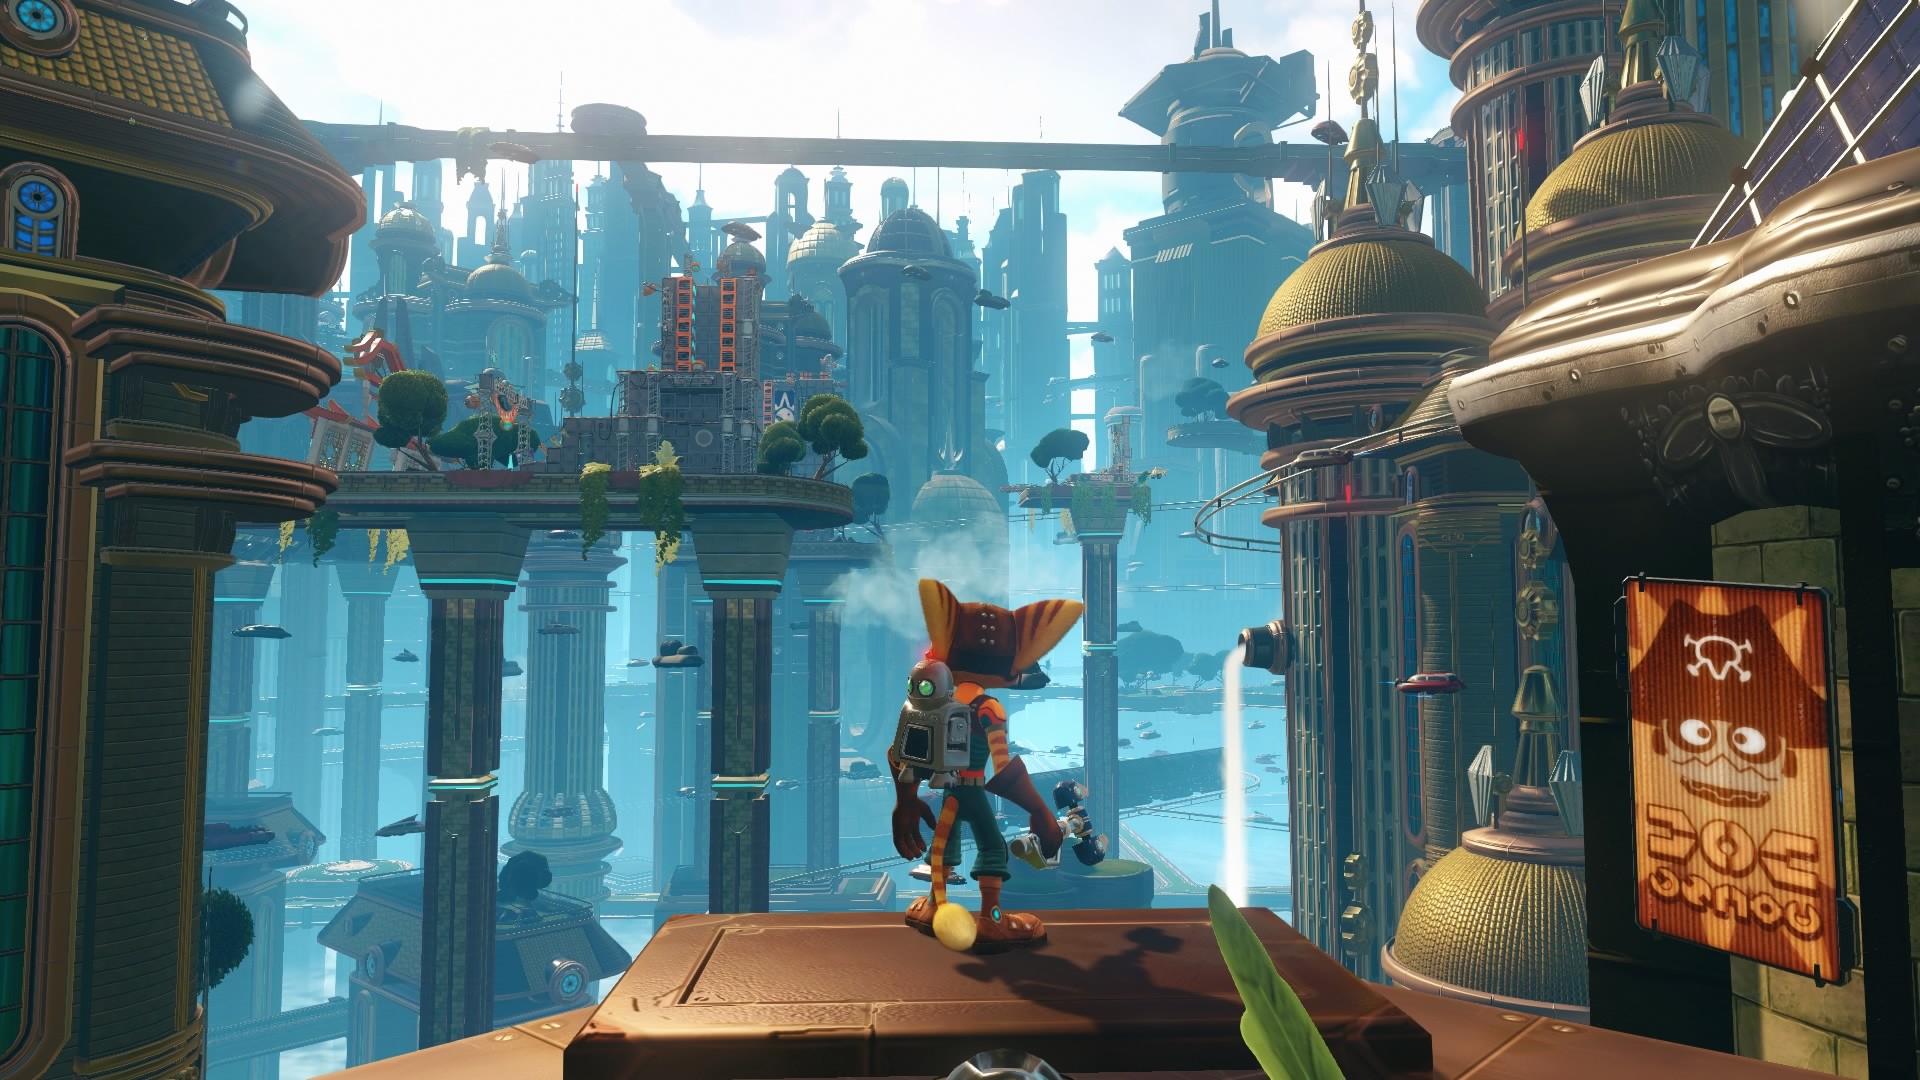 General 1920x1080 video games screen shot science fiction city cityscape airships Ratchet & Clank